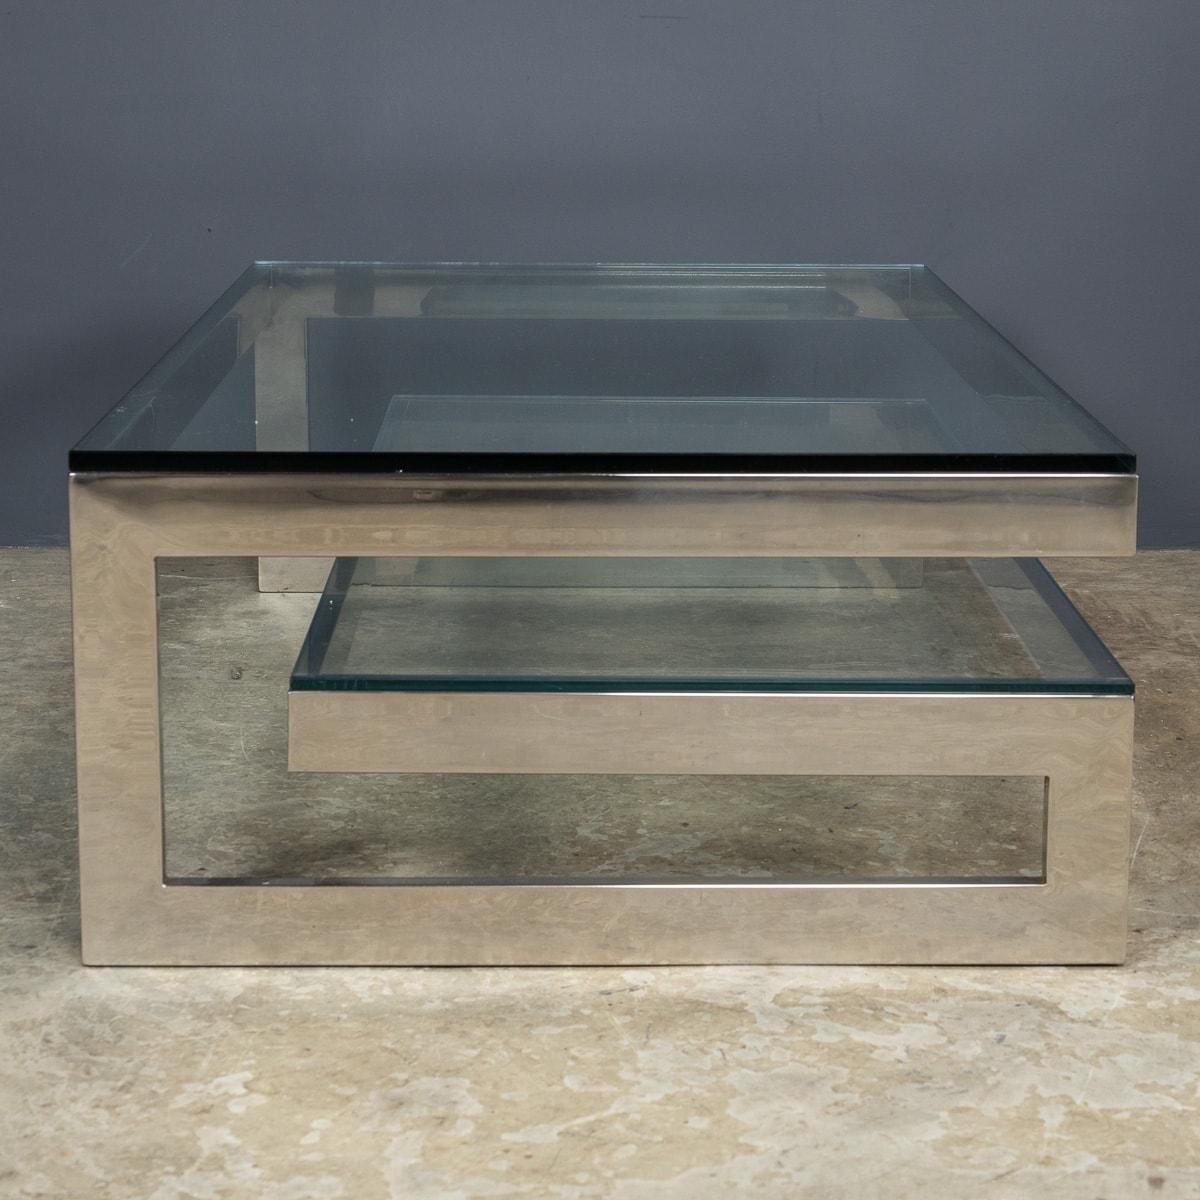 Late 20th Century 20th Century Polished Metal & Glass Coffee Table By Belgo Chrome, Belgium c.1970 For Sale